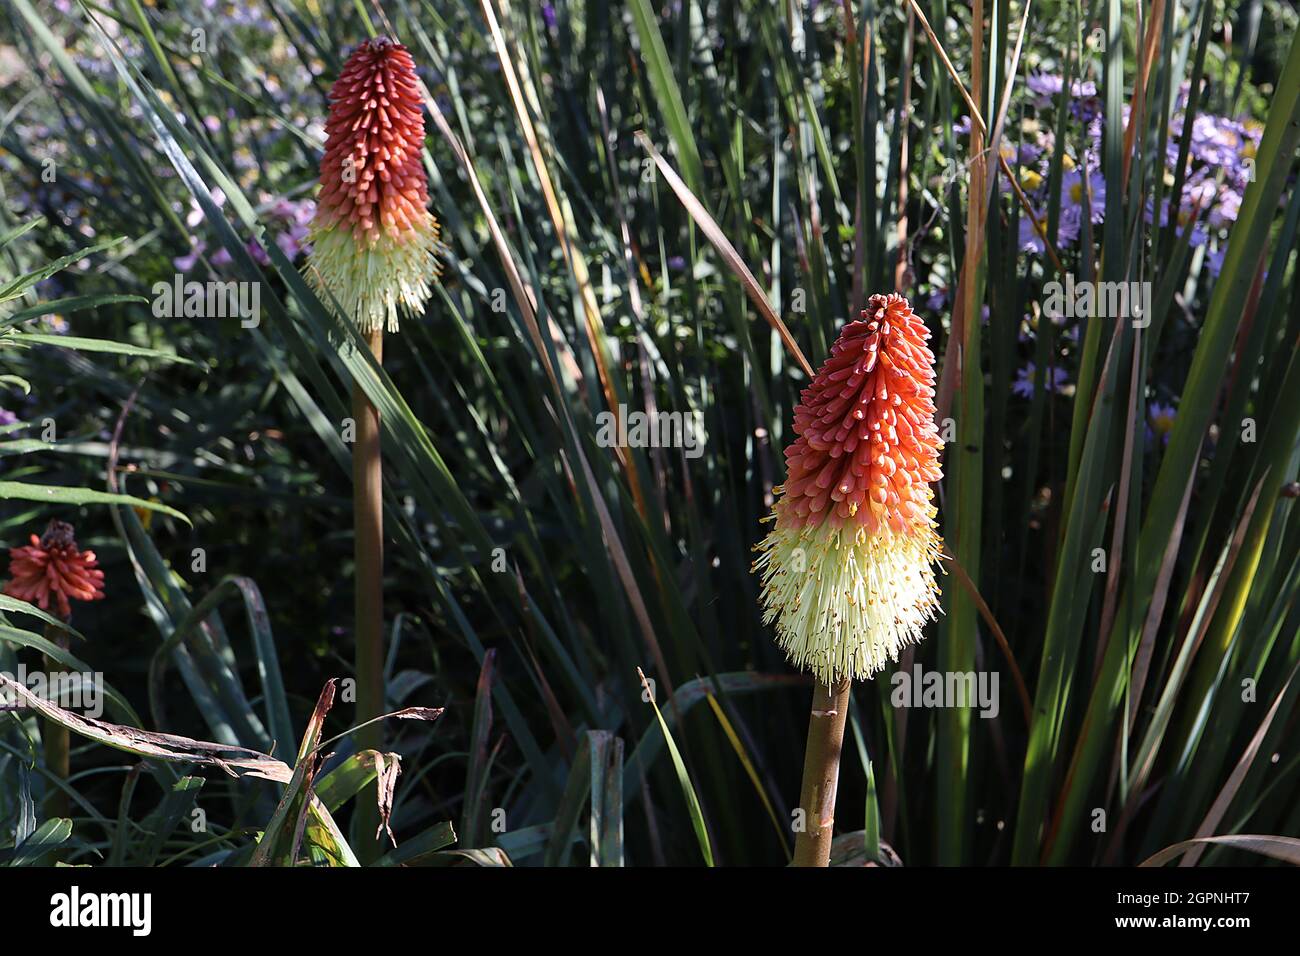 Kniphofia ‘Creamsicle’ red hot poker Creamsicle – dwarf kniphofia with tubular coral red and yellow pendulous conical flower clusters,  September, UK Stock Photo